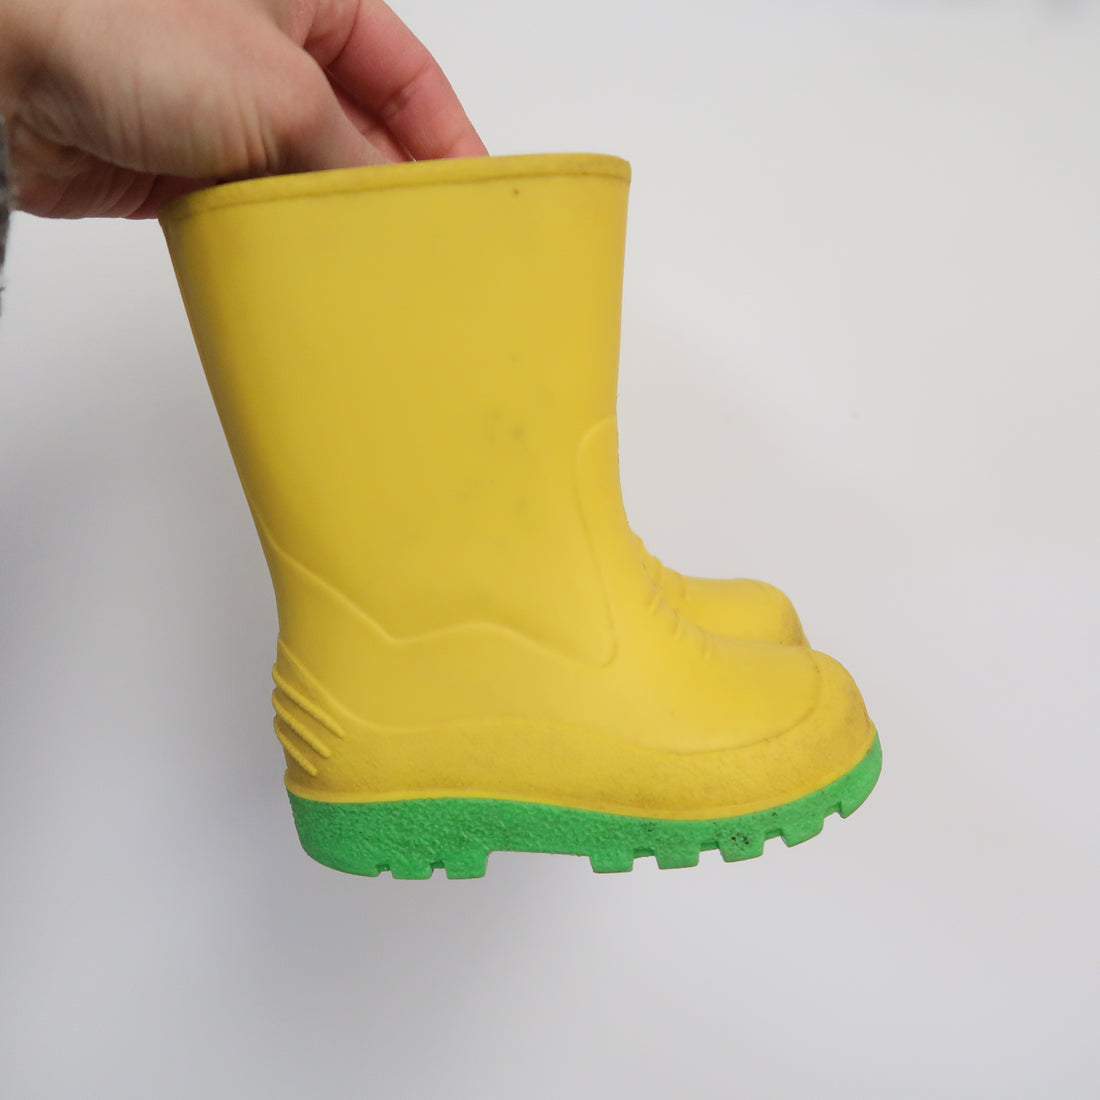 Unknown Brand - Rubber Boots (5)